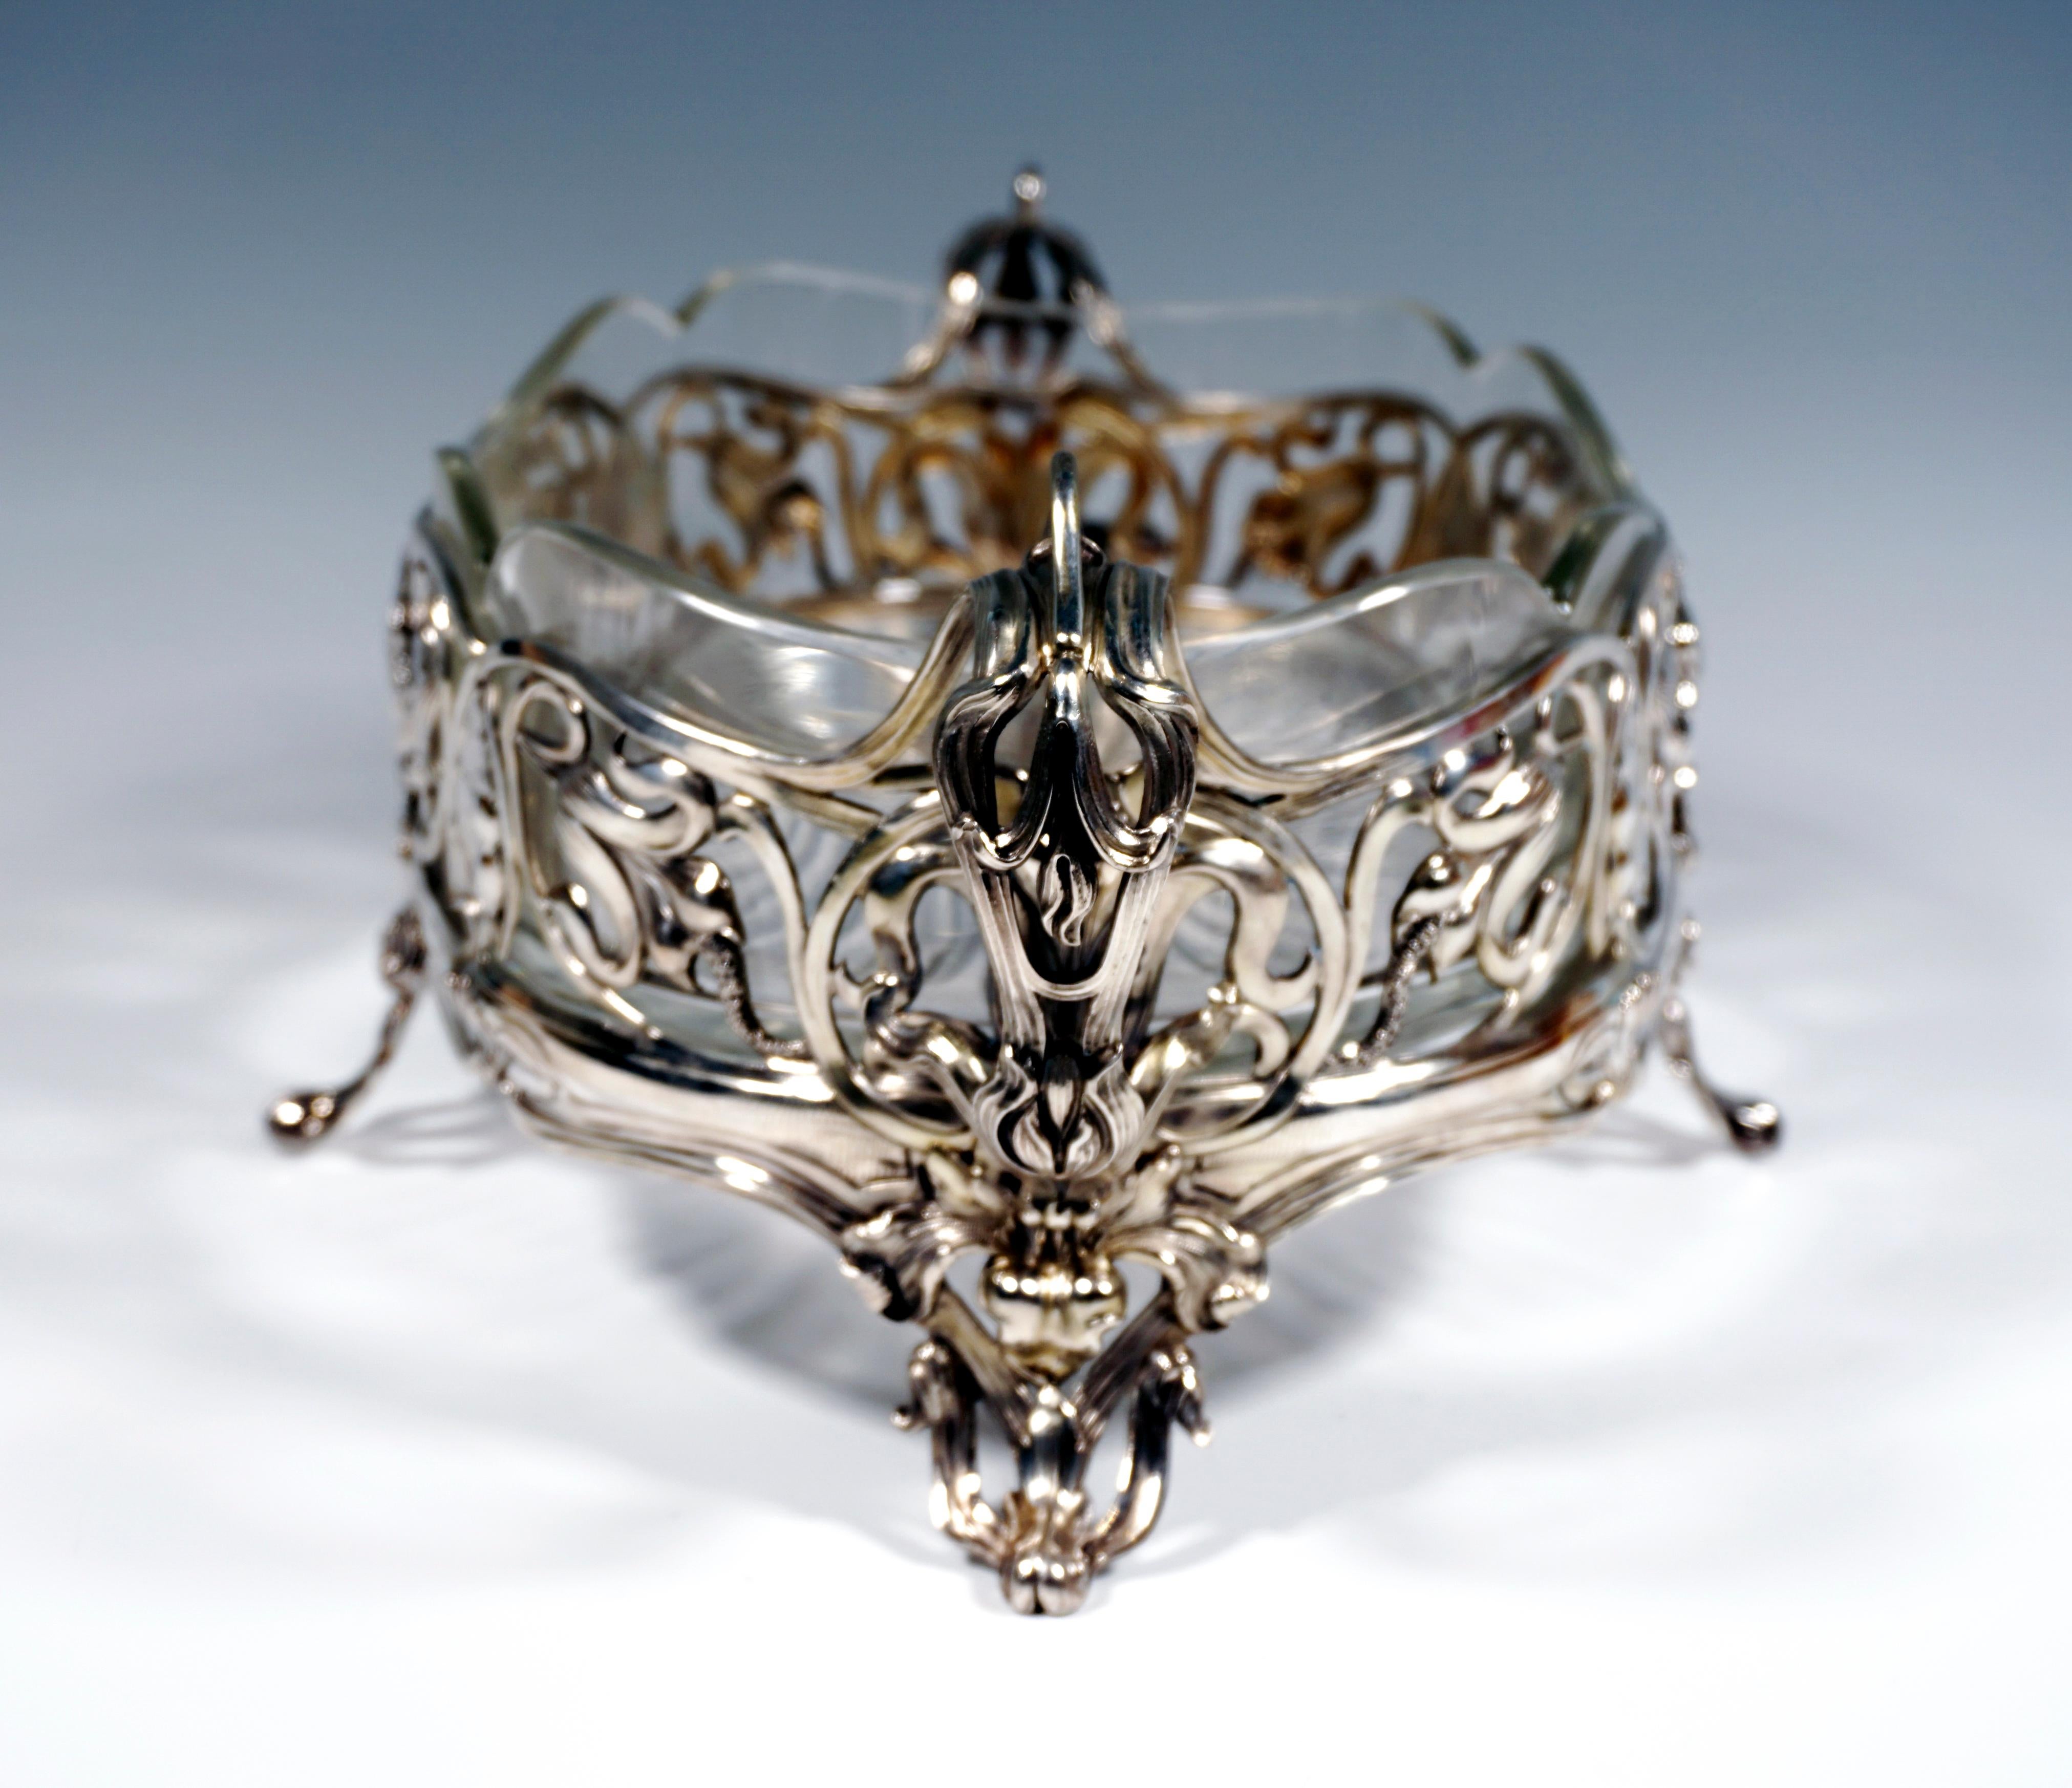 German Art Nouveau Silver Jardiniere with Original Glass Liner Viennese Master, ca 1900 For Sale